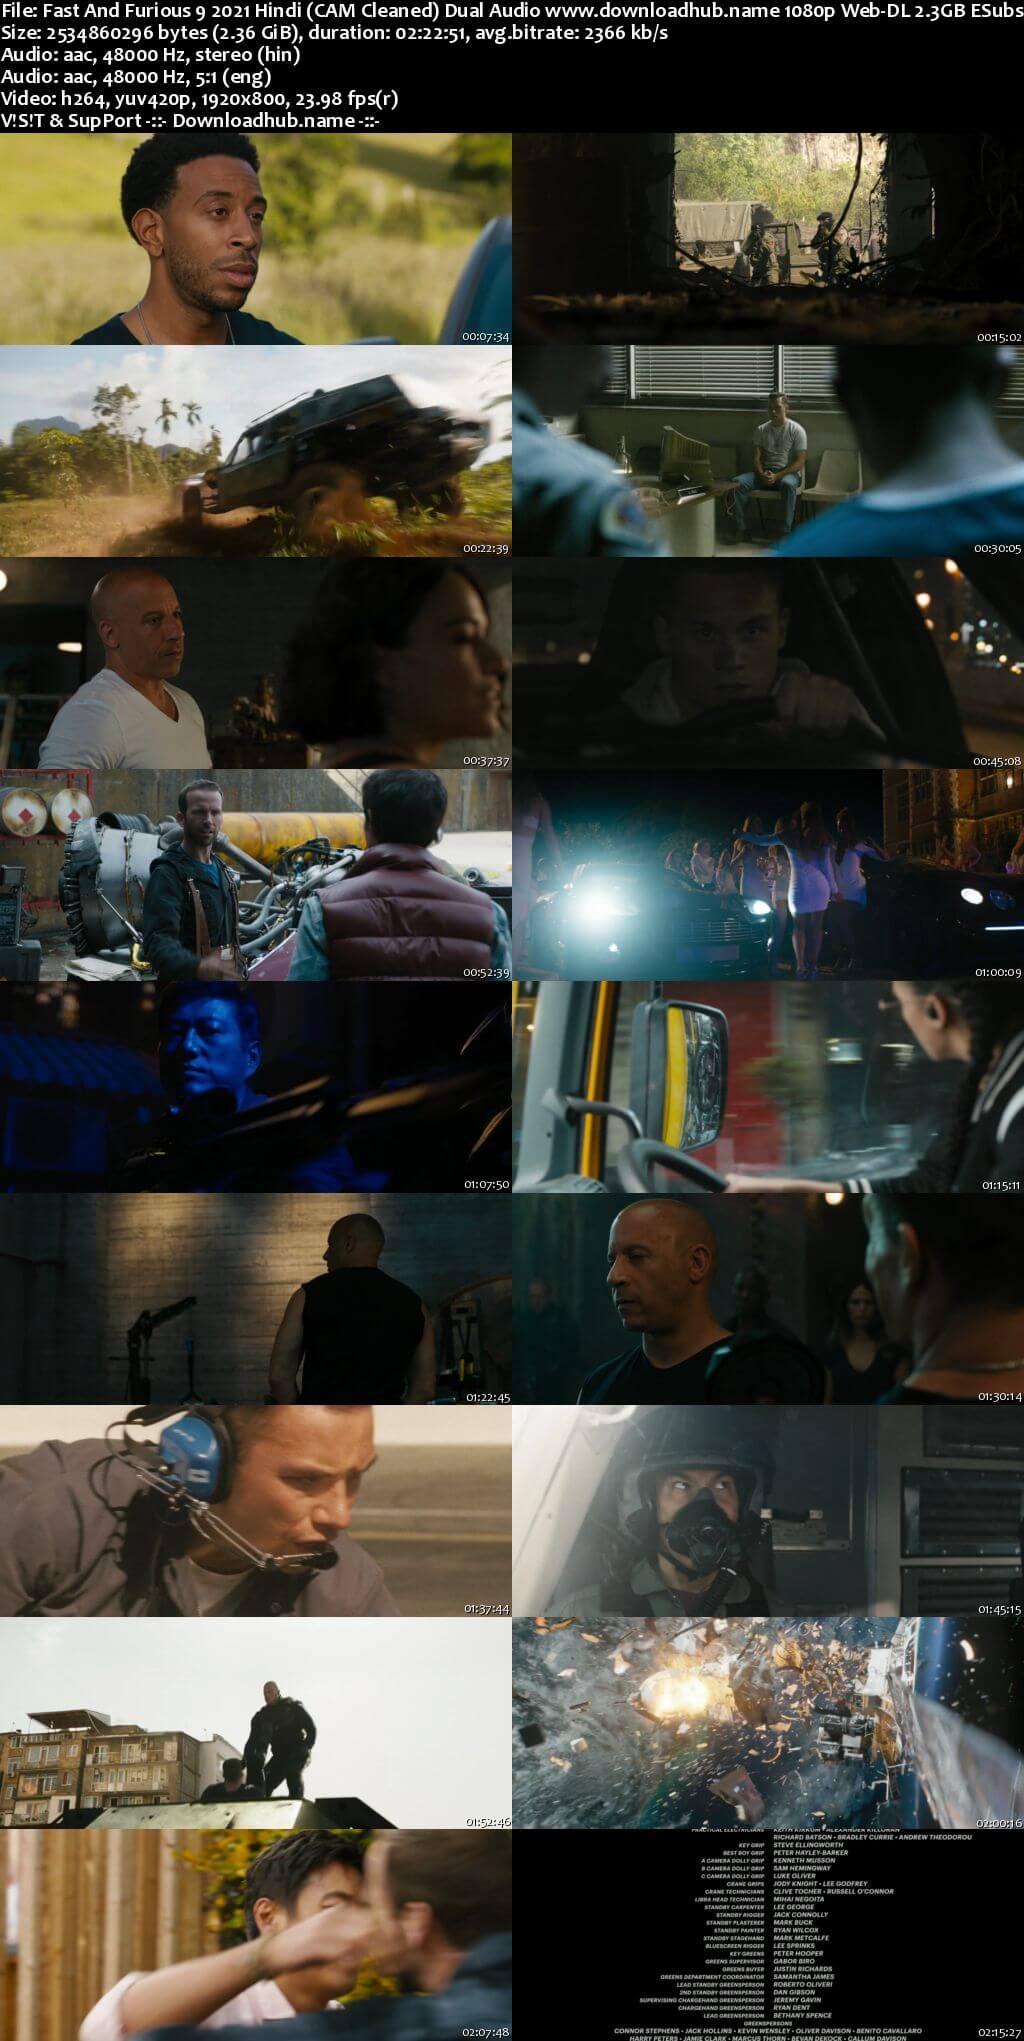 Fast And Furious 9 2021 Hindi (CAM Cleaned) Dual Audio 1080p Web-DL 2.3GB ESubs